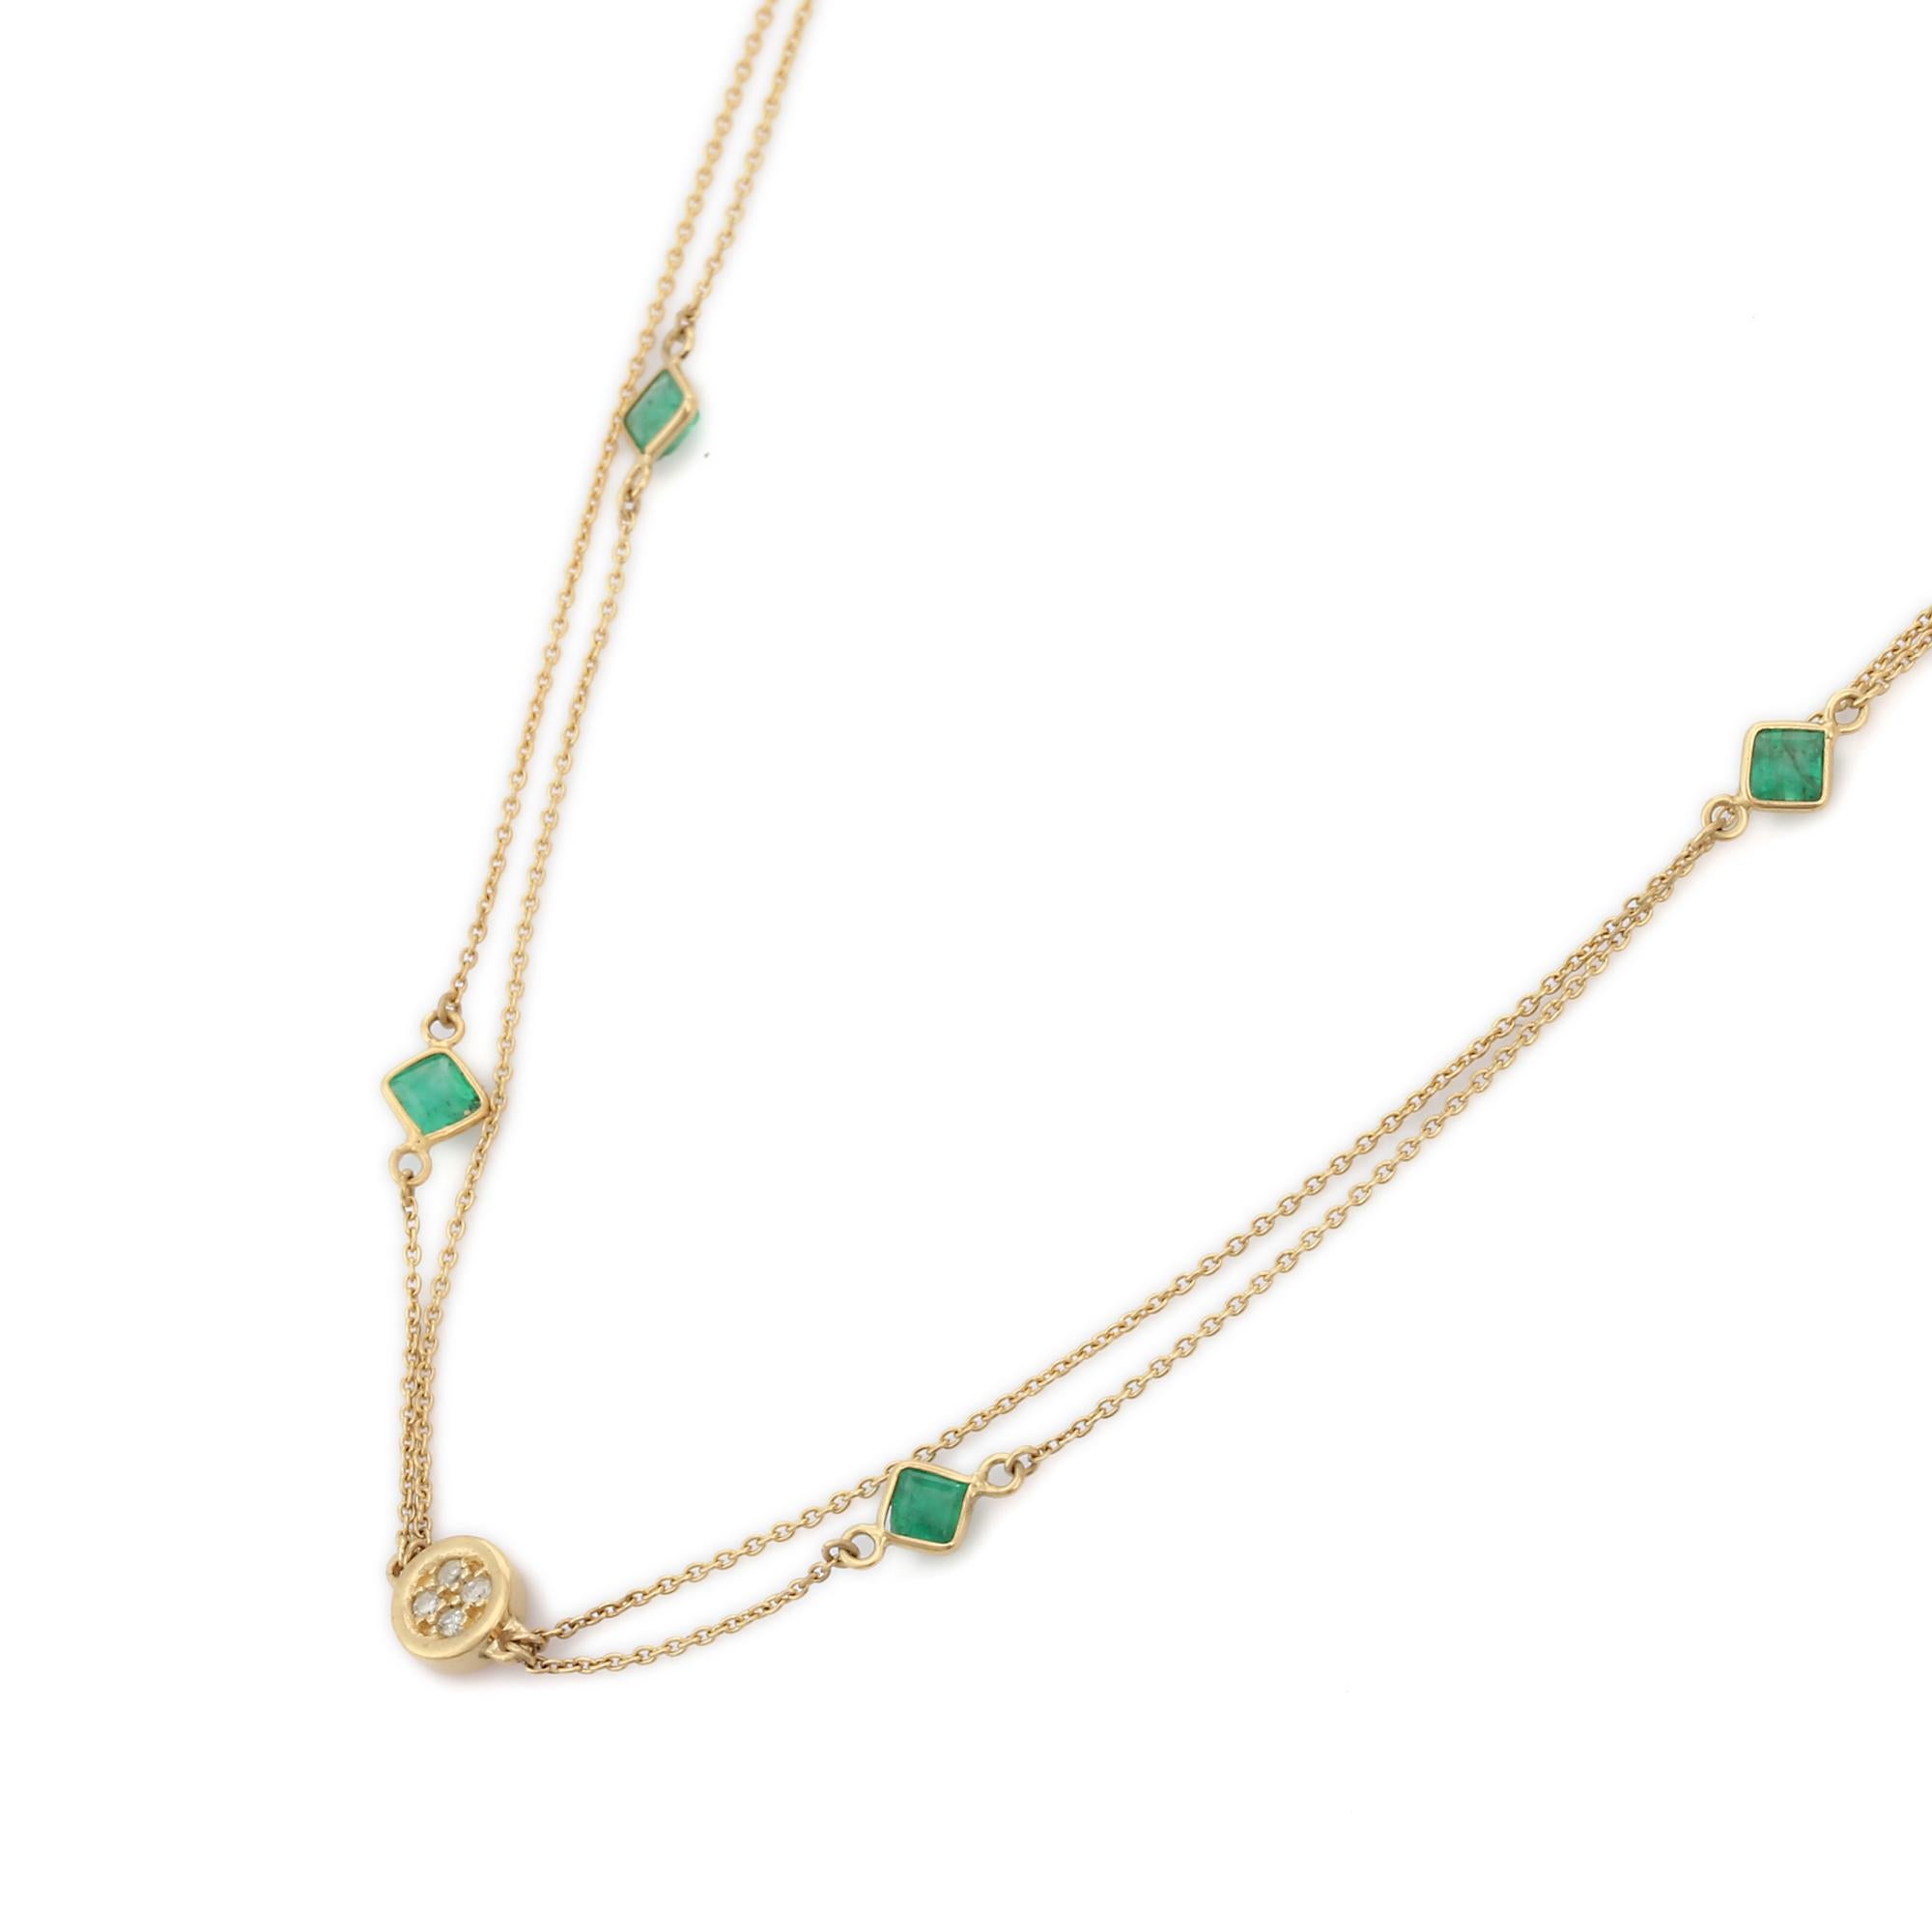 3.75 Carat Emerald Diamond Multi Strained Chain Necklace in 18K Yellow Gold In New Condition For Sale In Houston, TX